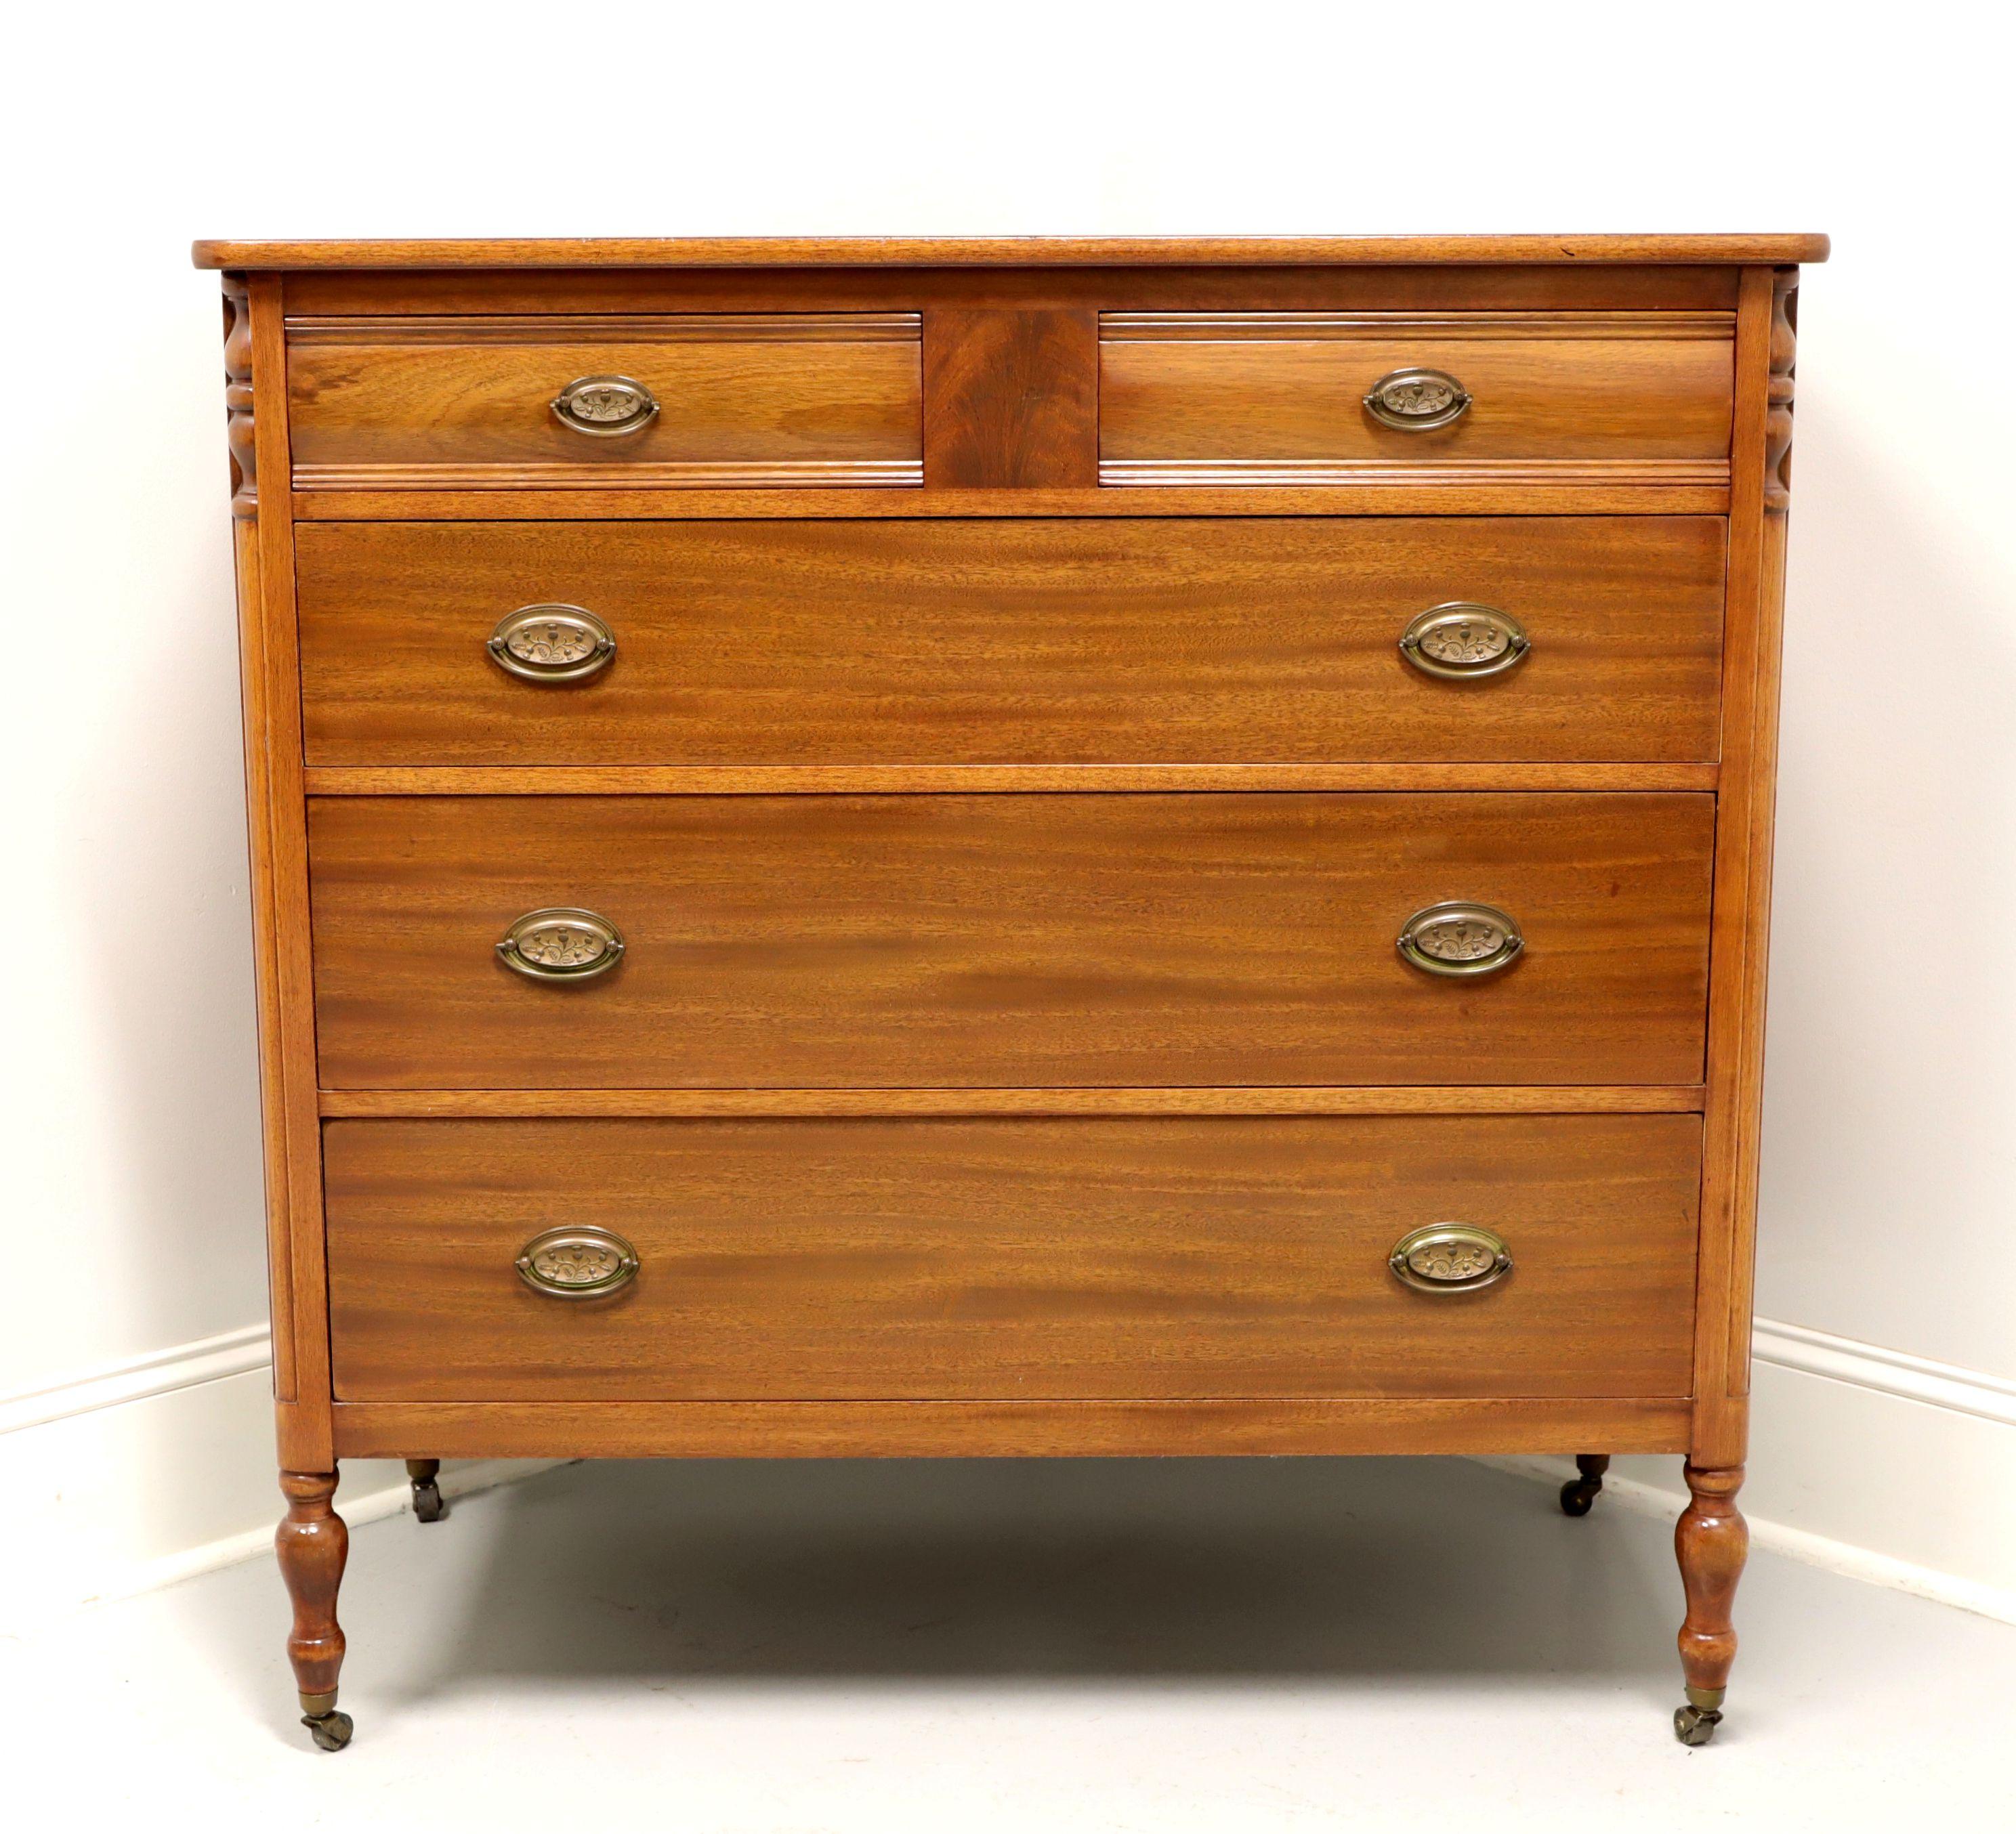 A Sheraton style two over three chest of drawers by Berkey & Gay, of Grand Rapids, Michigan, USA. Solid mahogany with a lighter finish, brass hardware, decoratively carved corners and turned feet with brass casters. Features two smaller over three